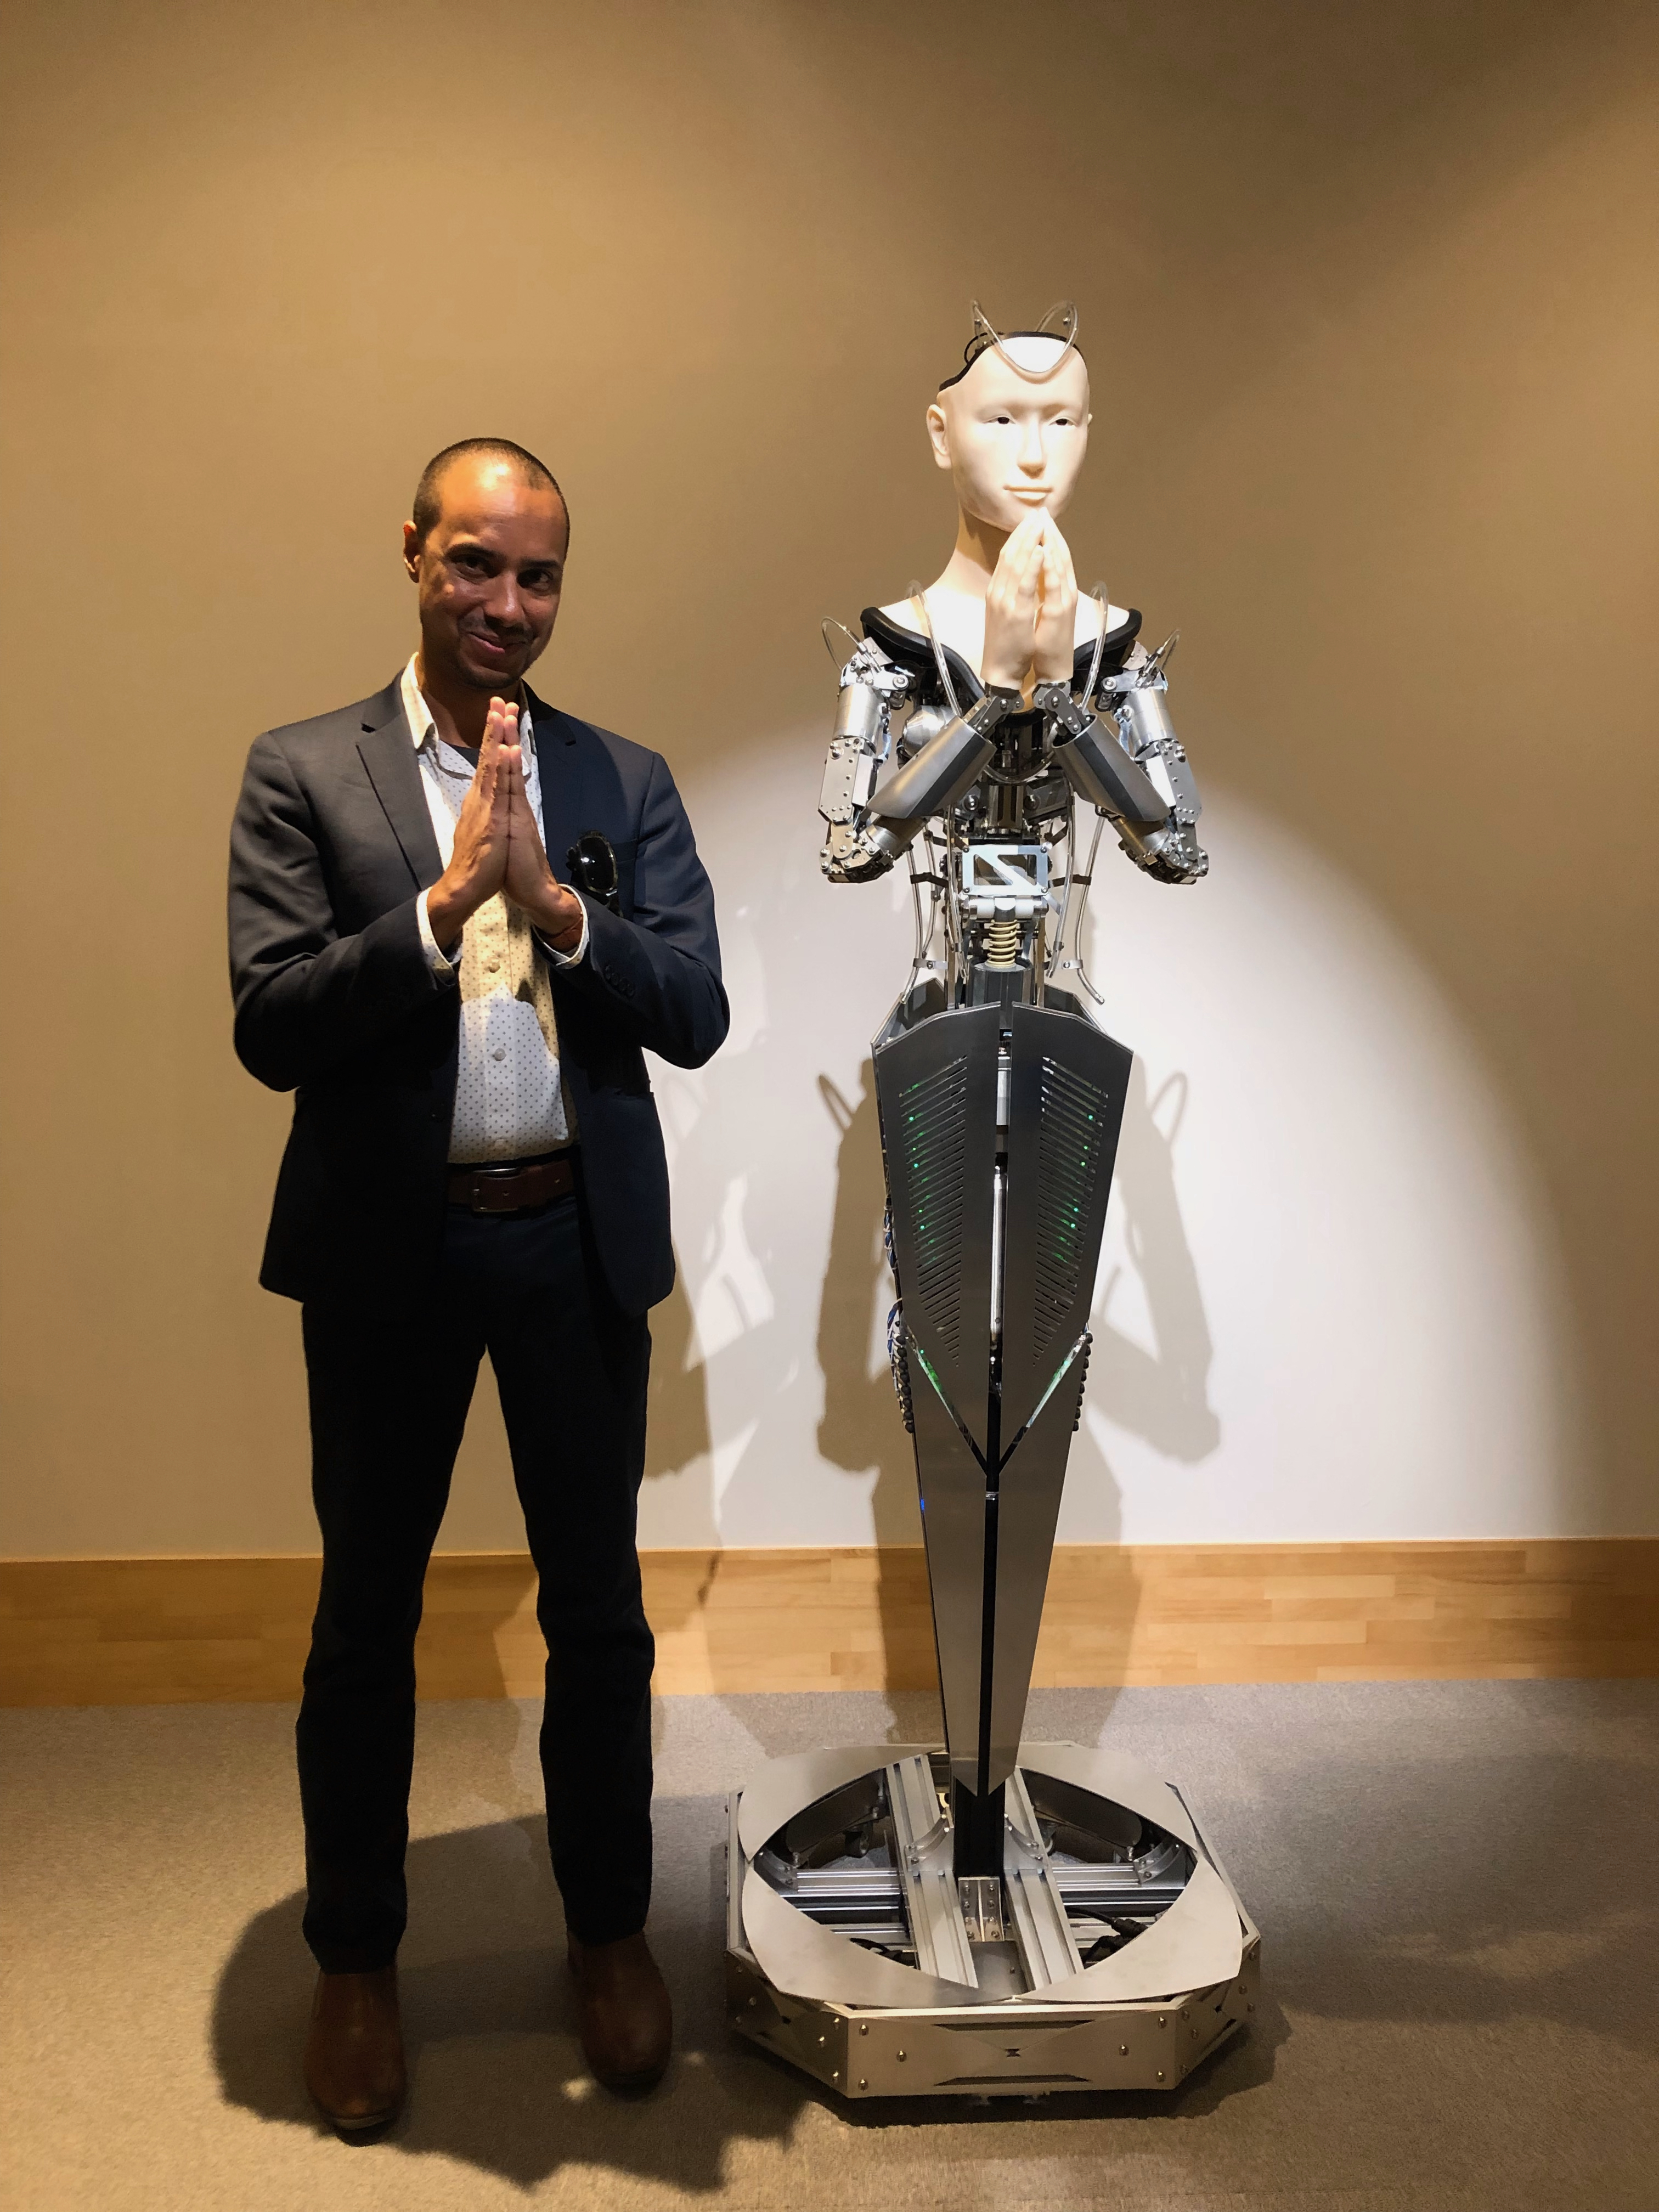 Man with prayer hands stands next to an android figure in a similar pose